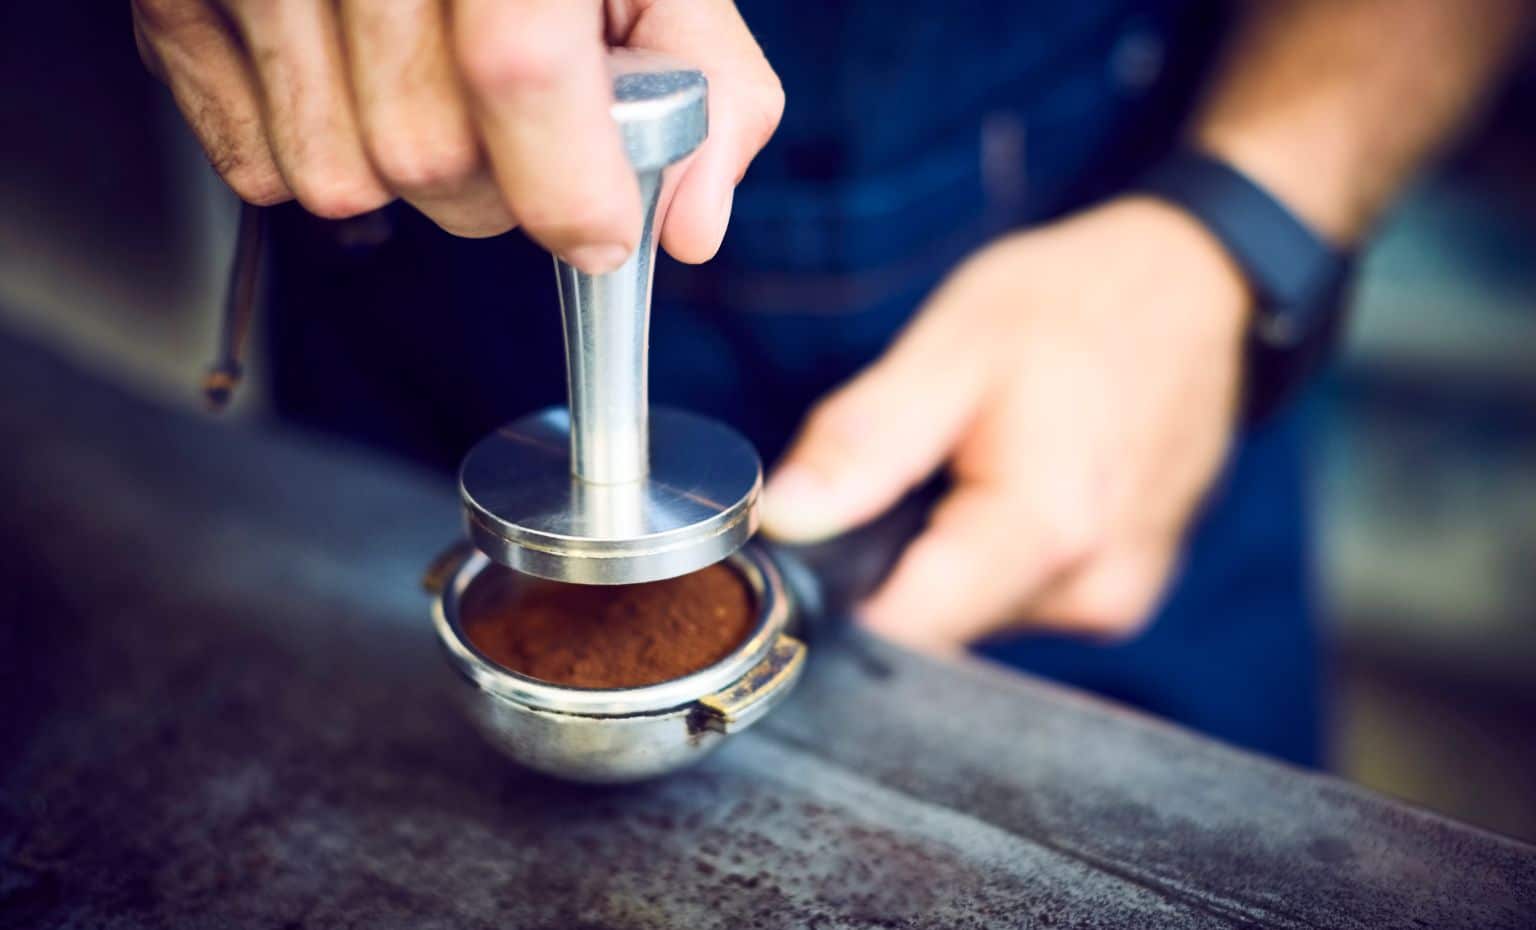 coffee tamping tips for beginners